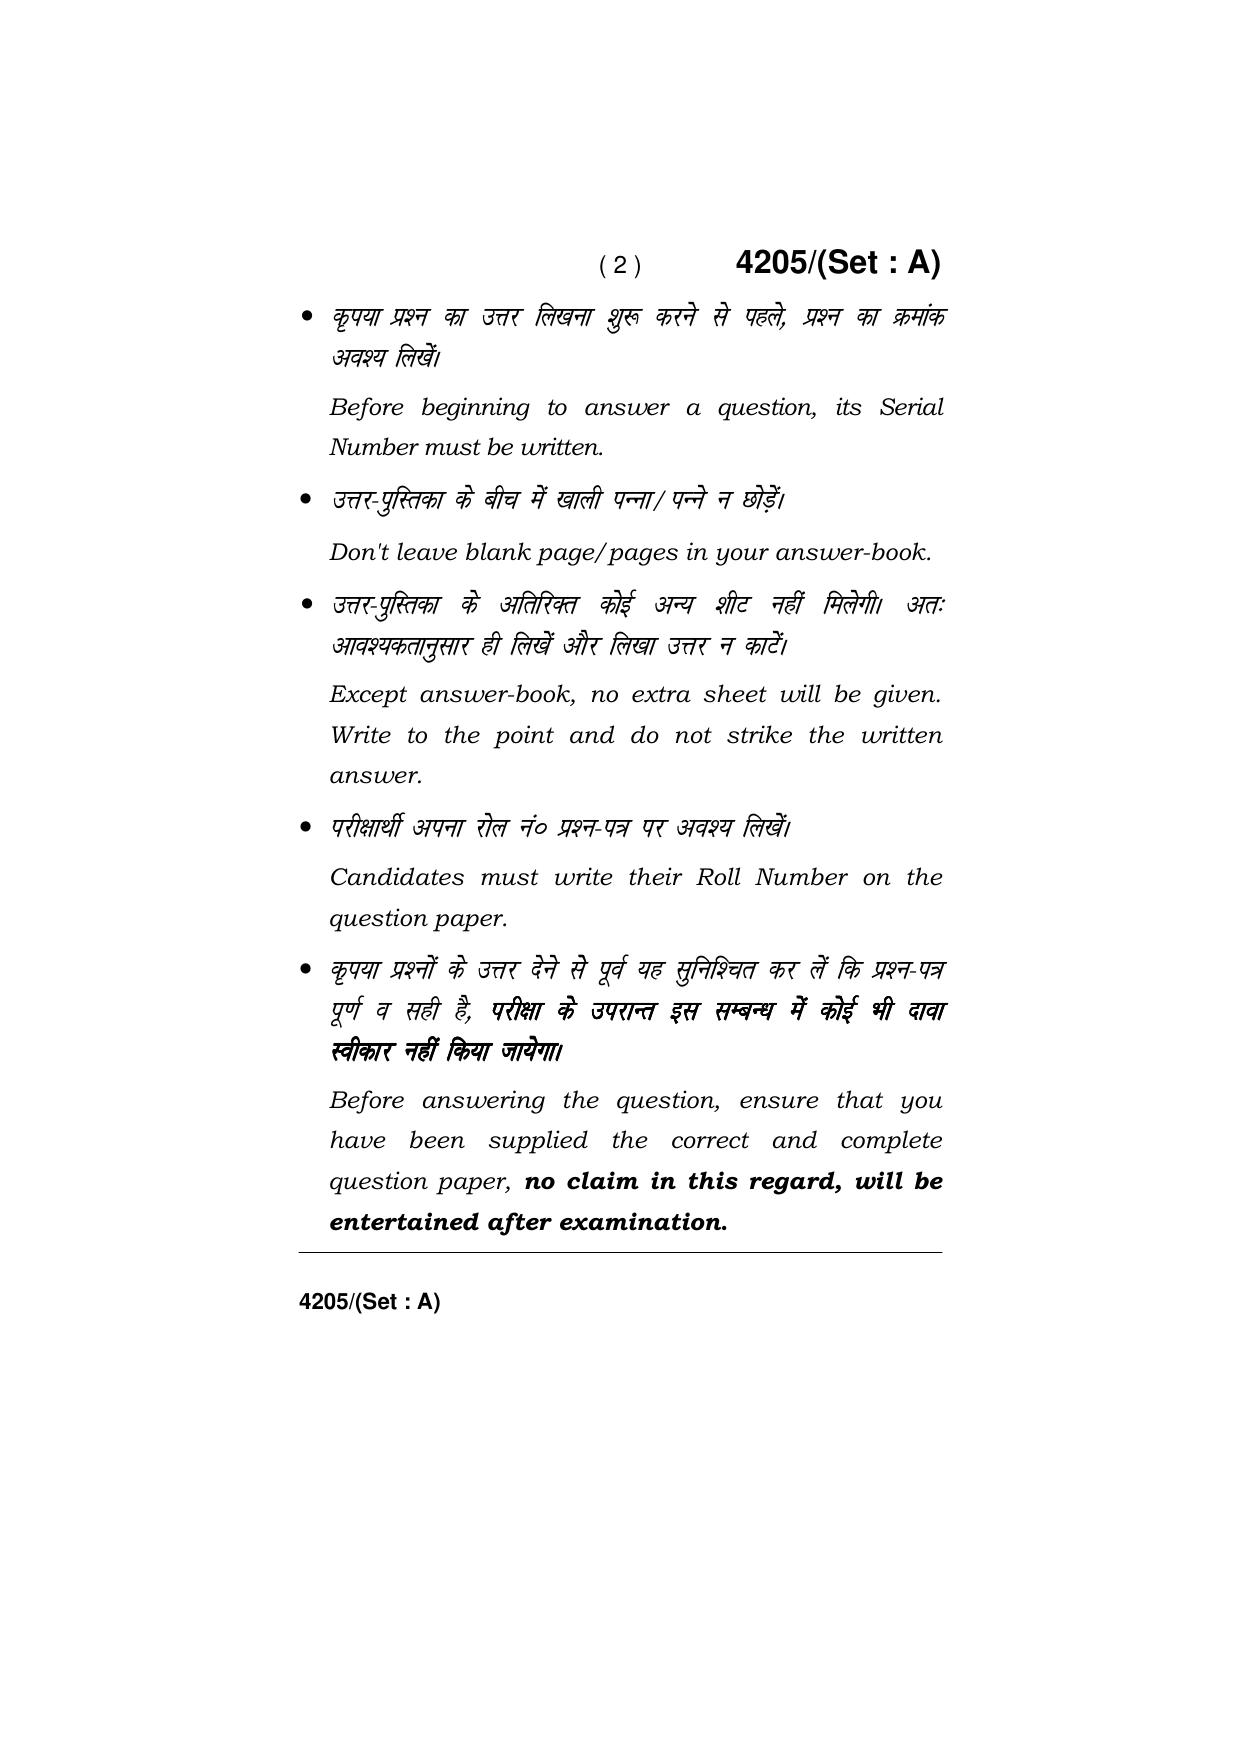 Haryana Board HBSE Class 10 Science (All Set) 2019 Question Paper - Page 2